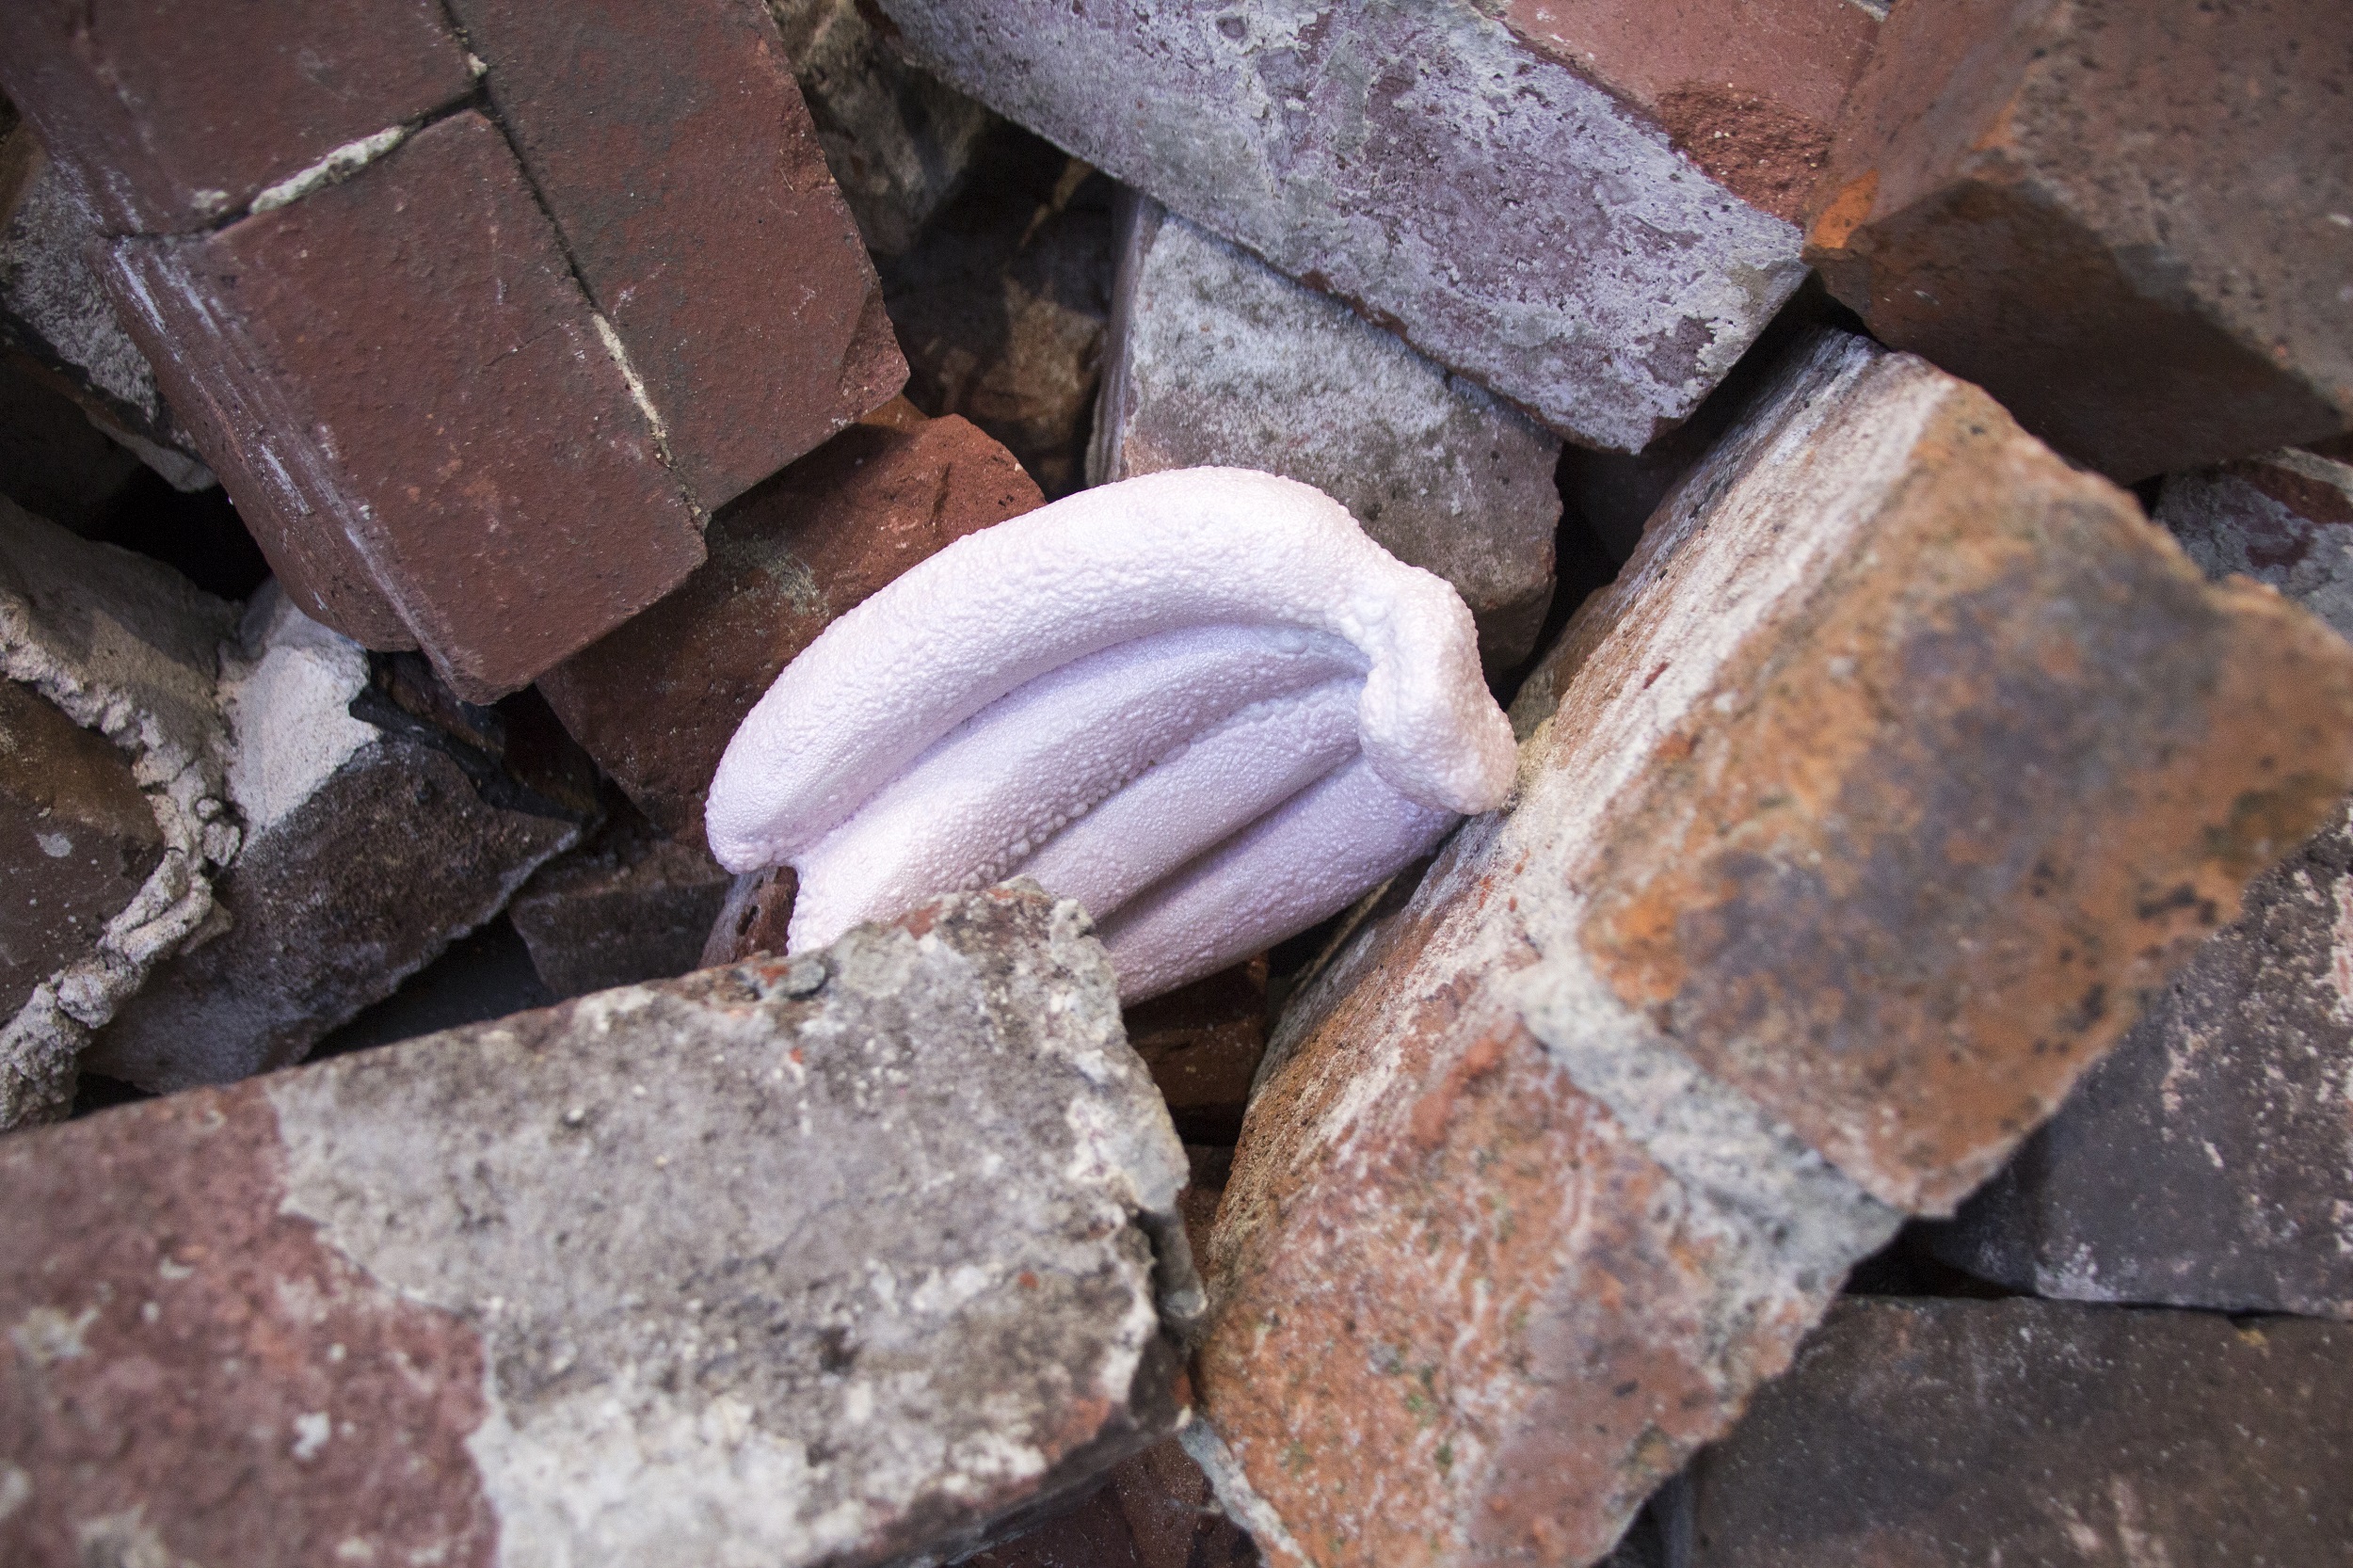 Close-up color photograph of a pile of fire-scarred bricks, with a pale-pink bunch of bananas in the center